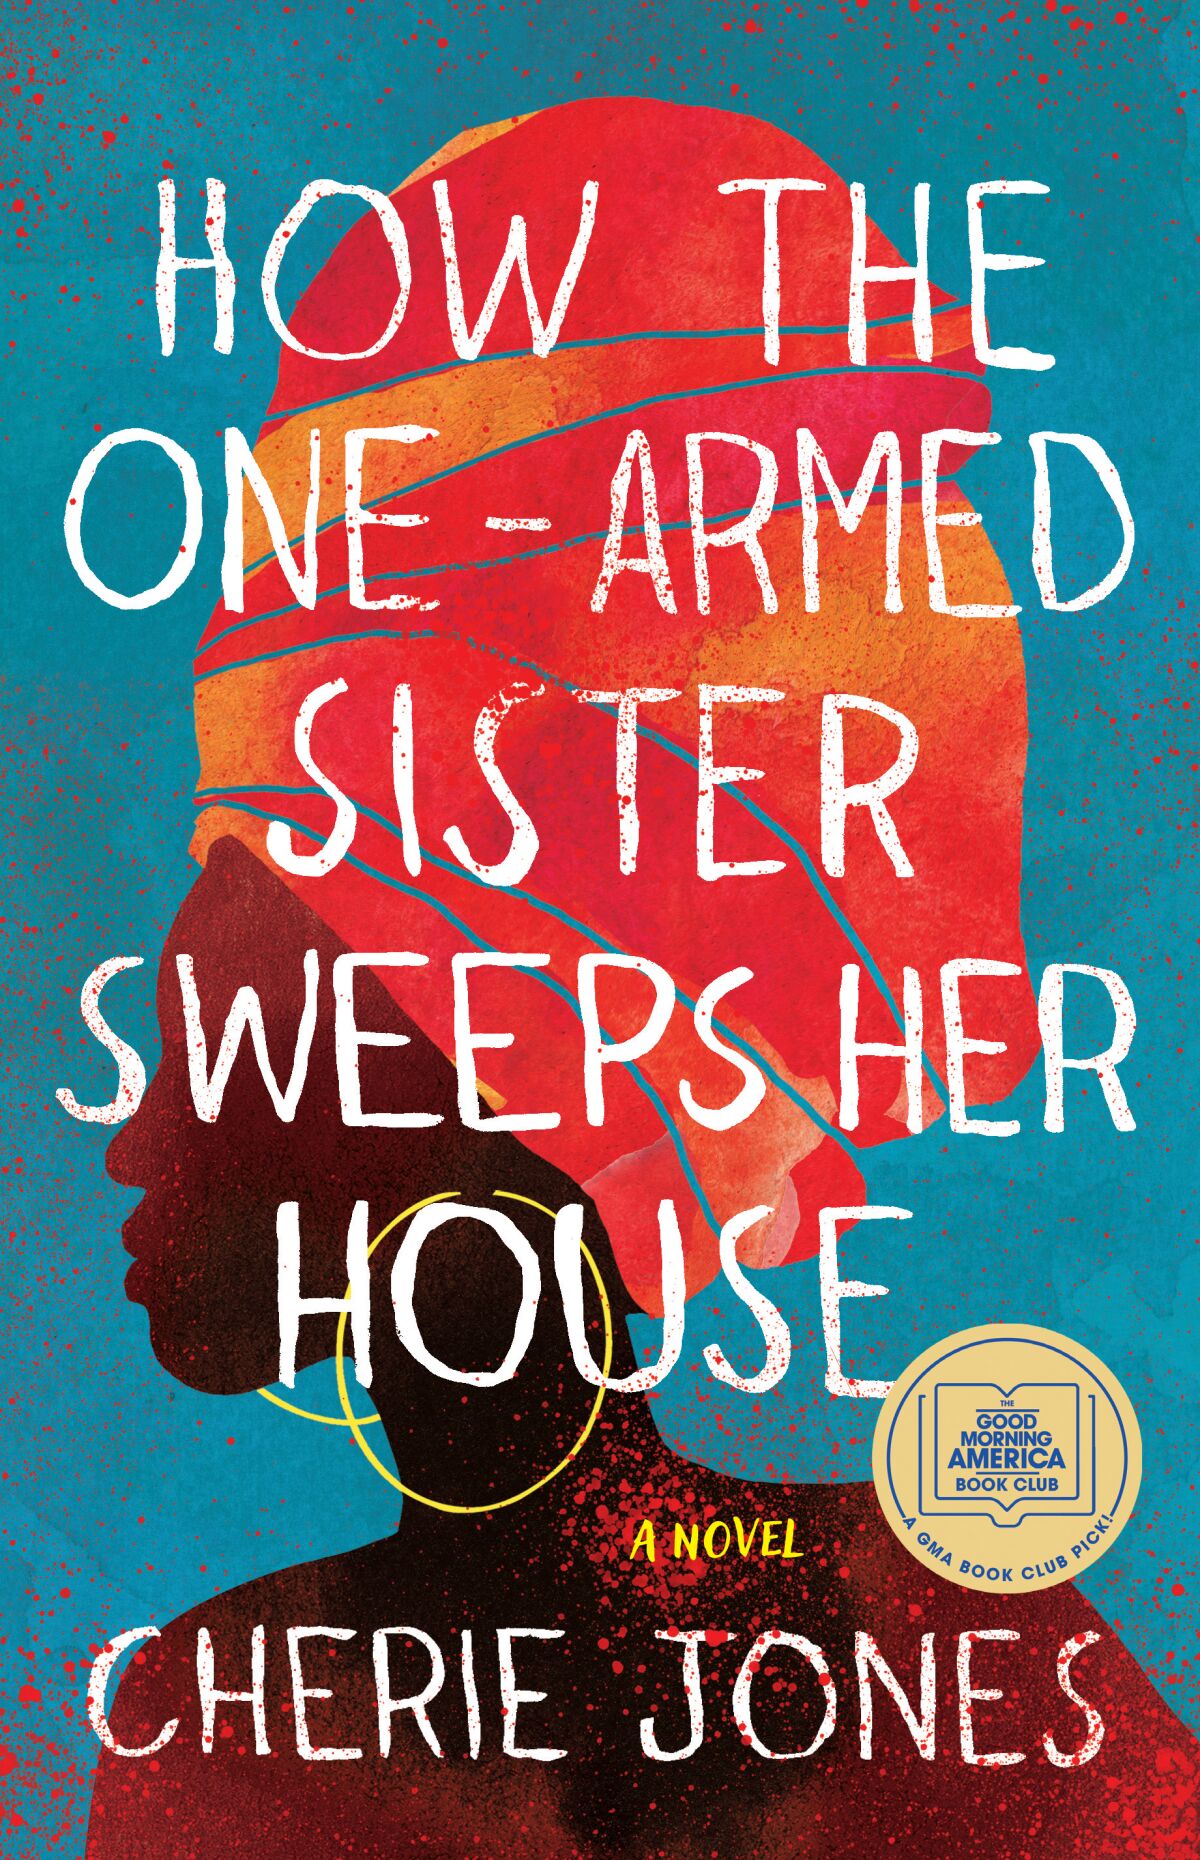 Book jacket for "How the One-Armed Sister Sweeps Her House" by Cherie Jones.